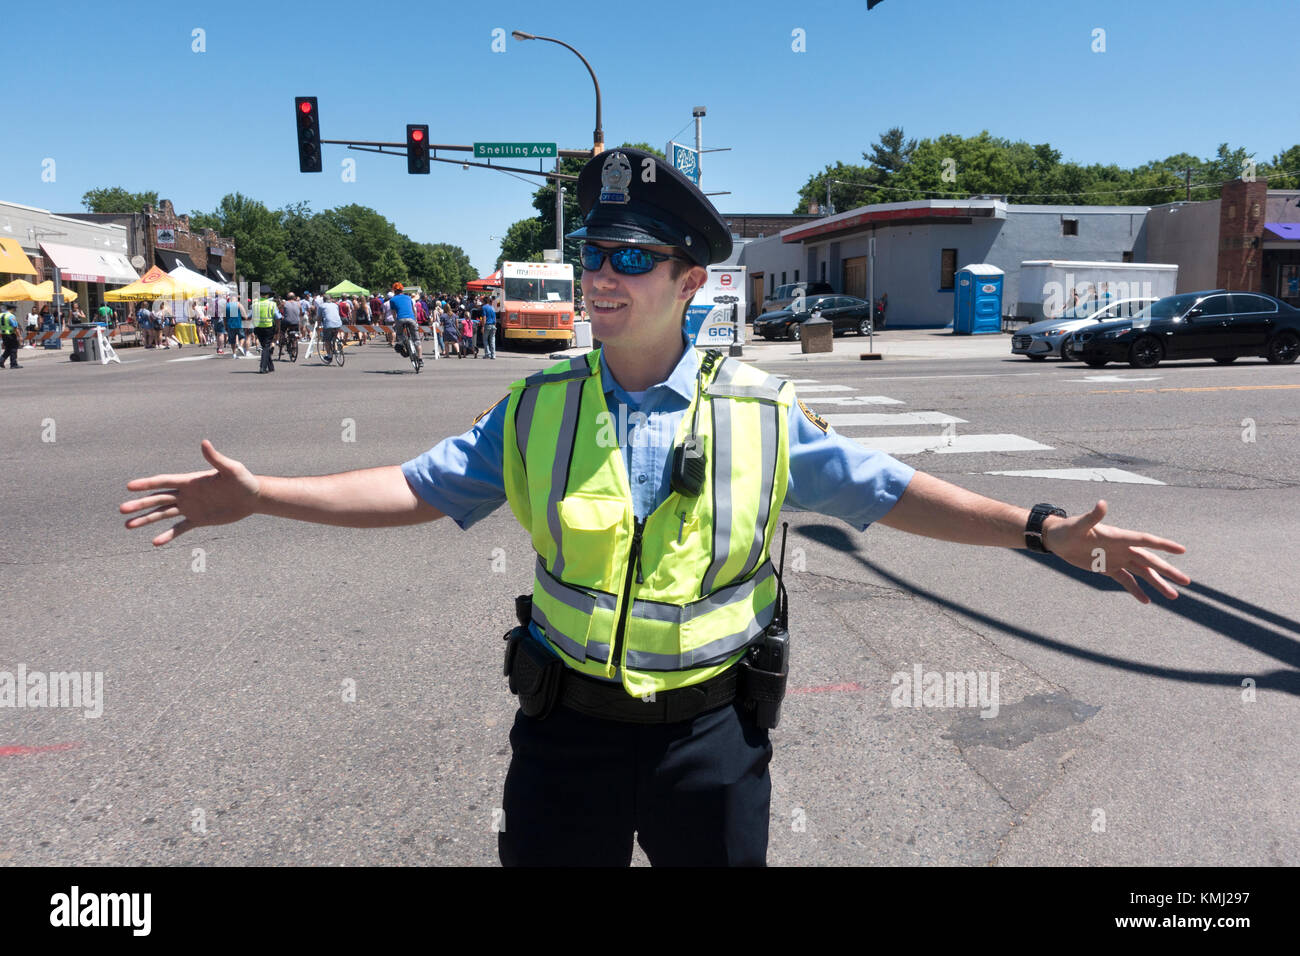 Policeman wearing a florescent safety vest directing traffic at Grand Old Day festivities. St Paul Minnesota MN USA Stock Photo